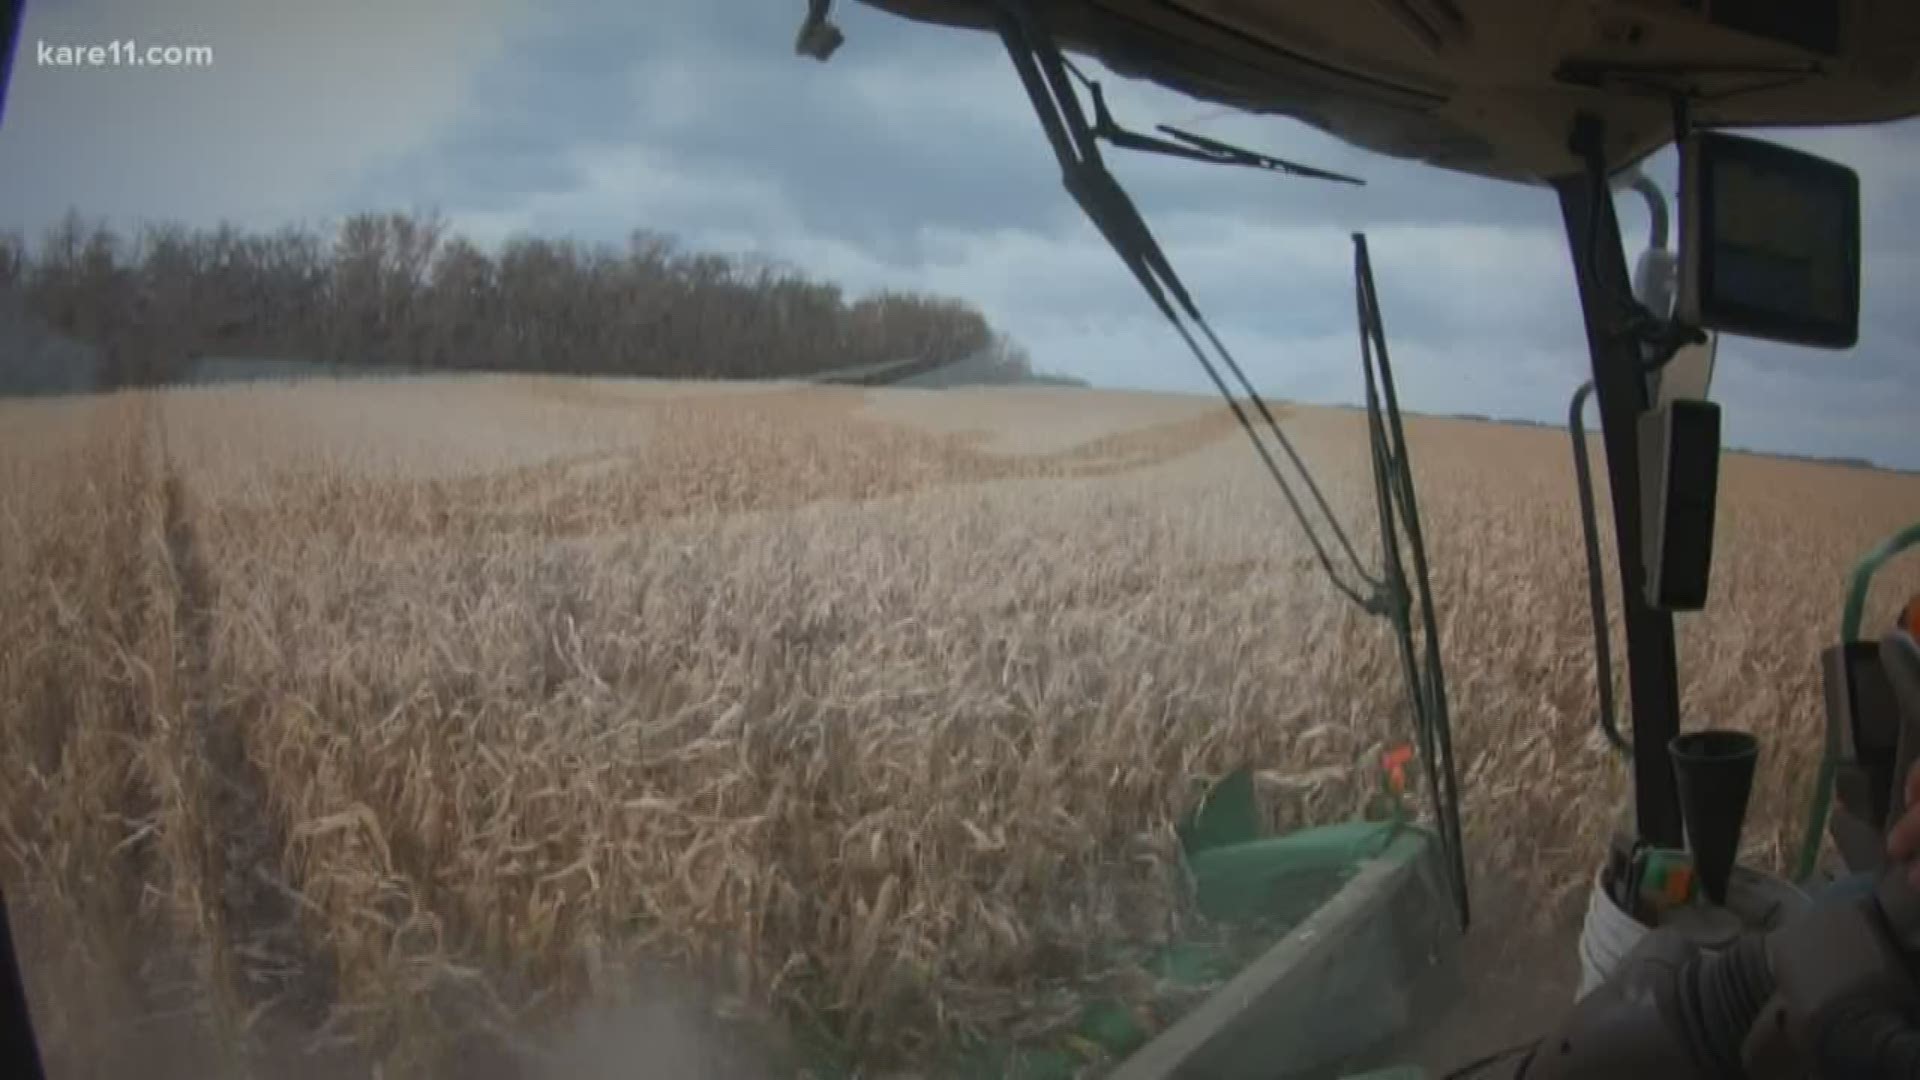 2019 was historically tough for Minnesota farmers.